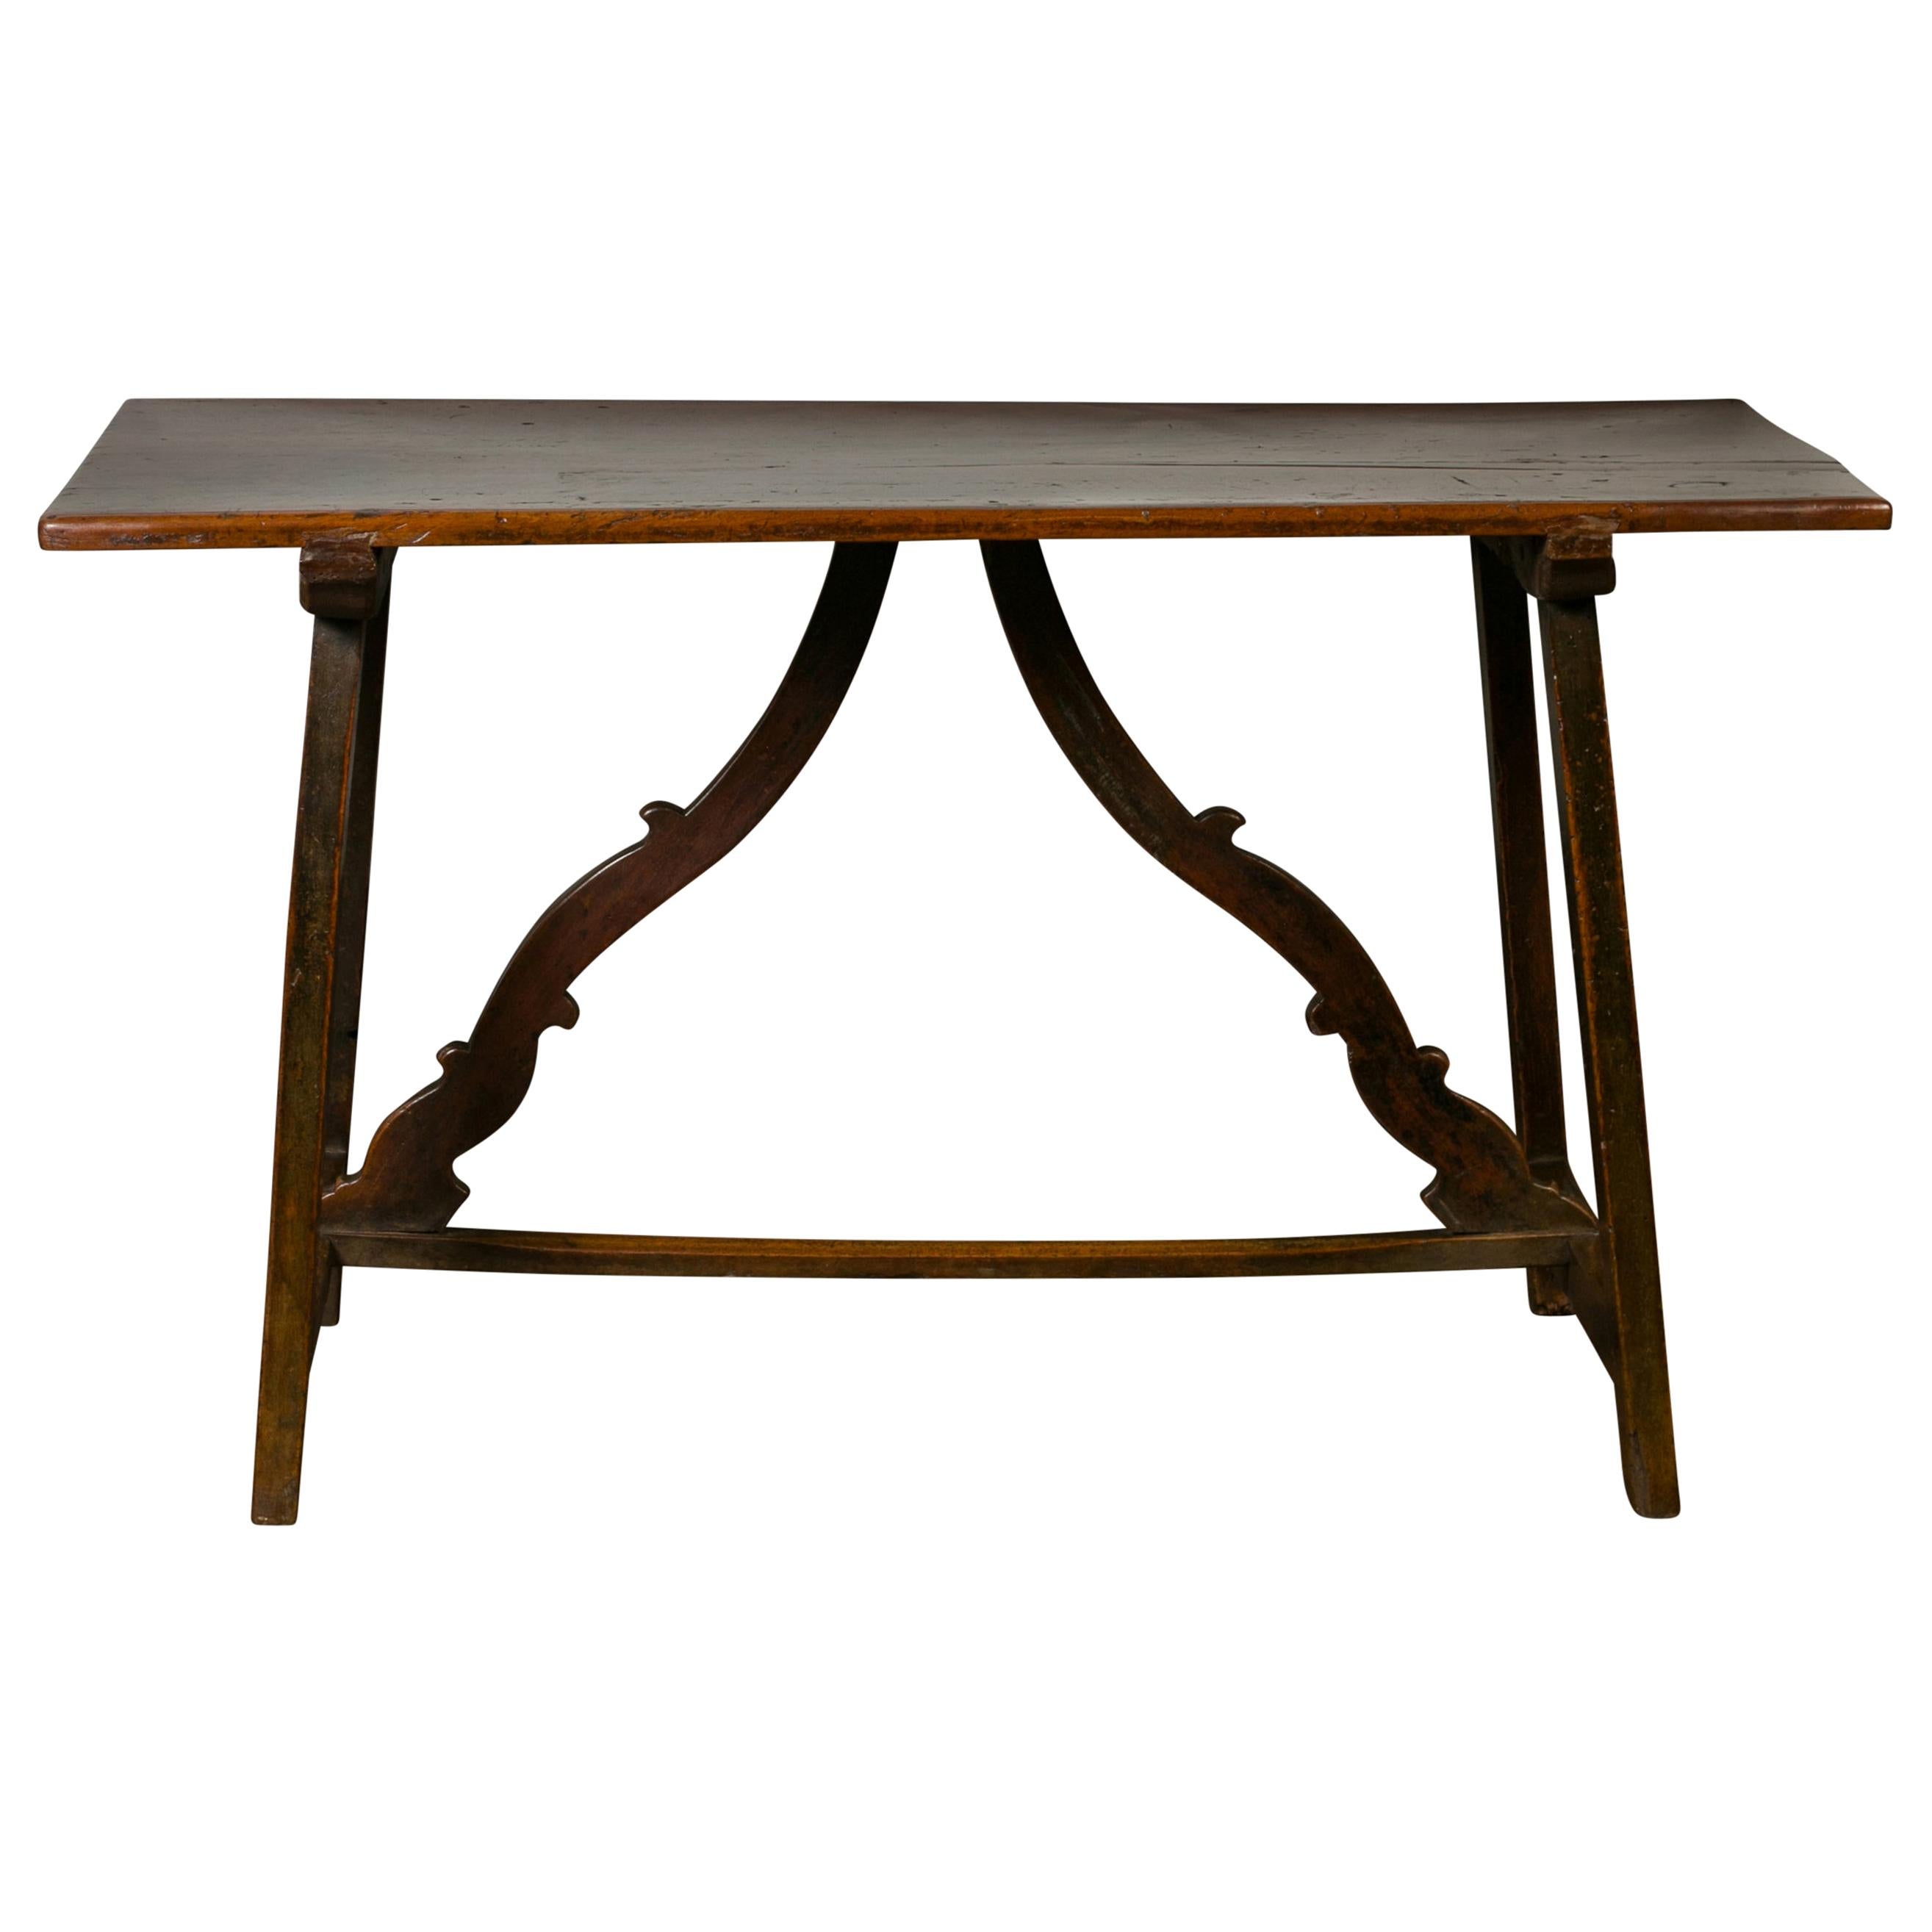 Italian 1820s Walnut Trestle Base Console Table with Carved Scrolling Stretchers For Sale